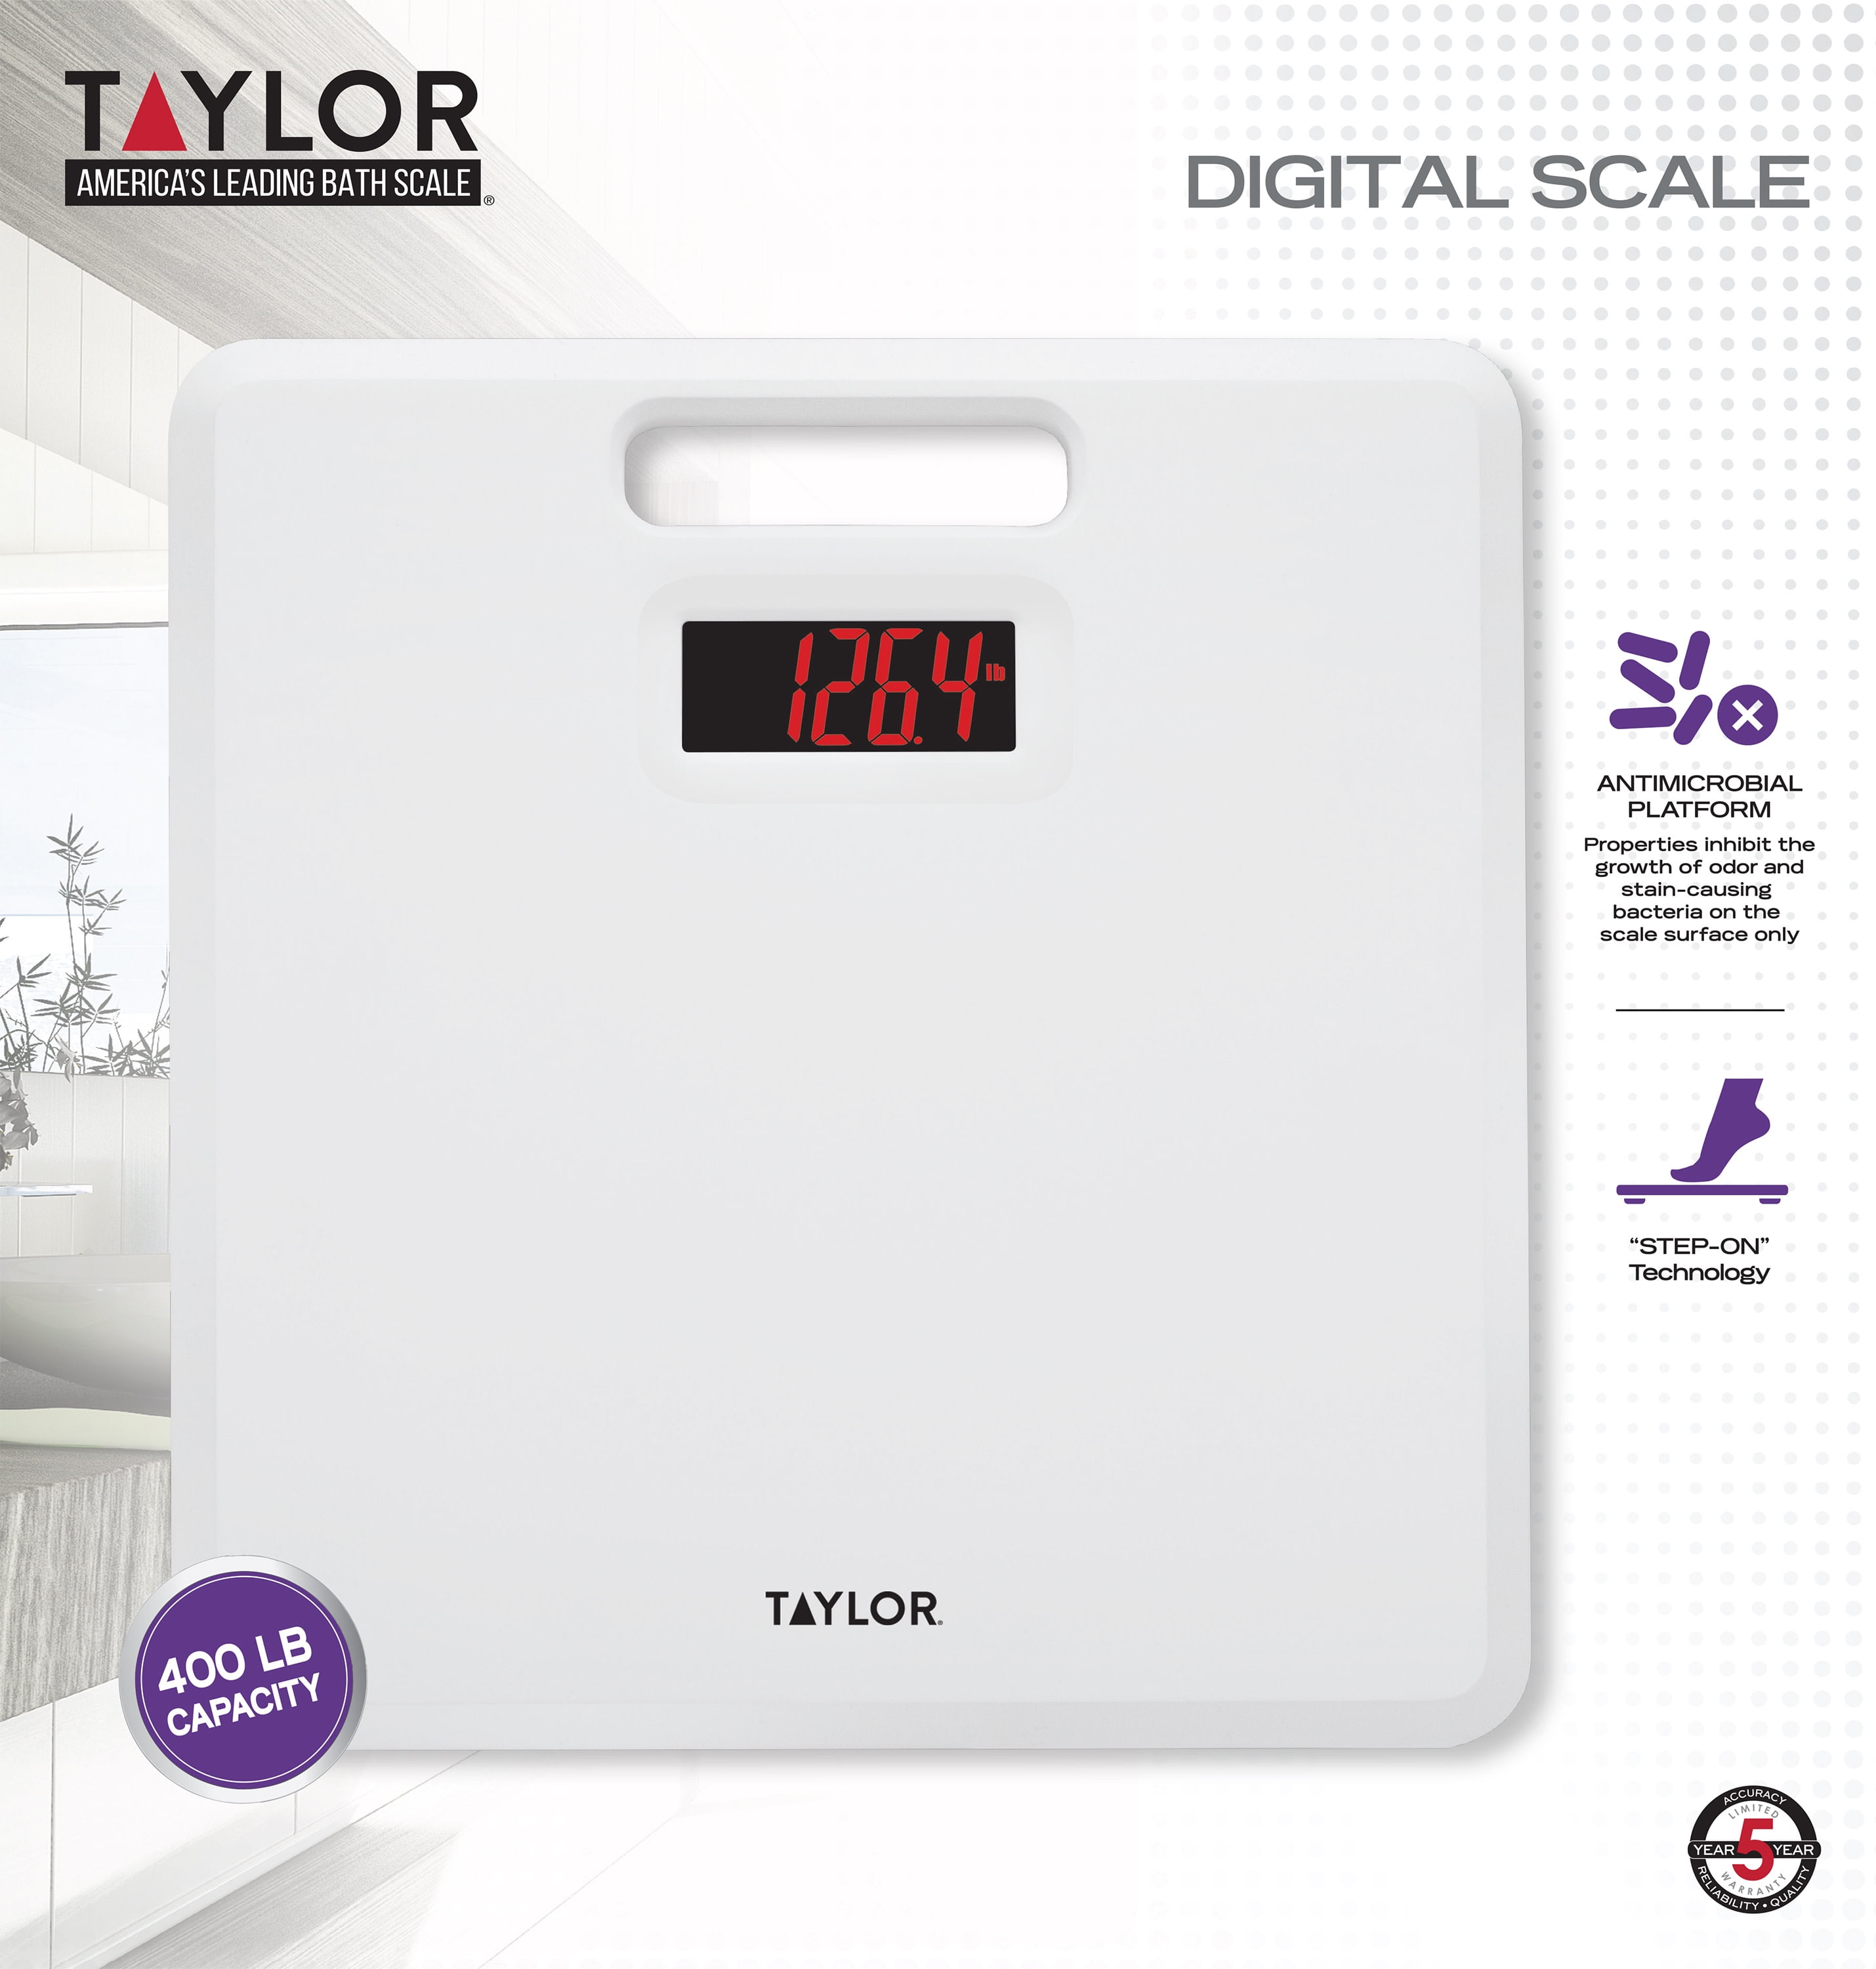 Taylor Digital Bath Scale with Antimicrobial Surface Protection, Bathroom Scale for Body Weight, 400 lbs. Black